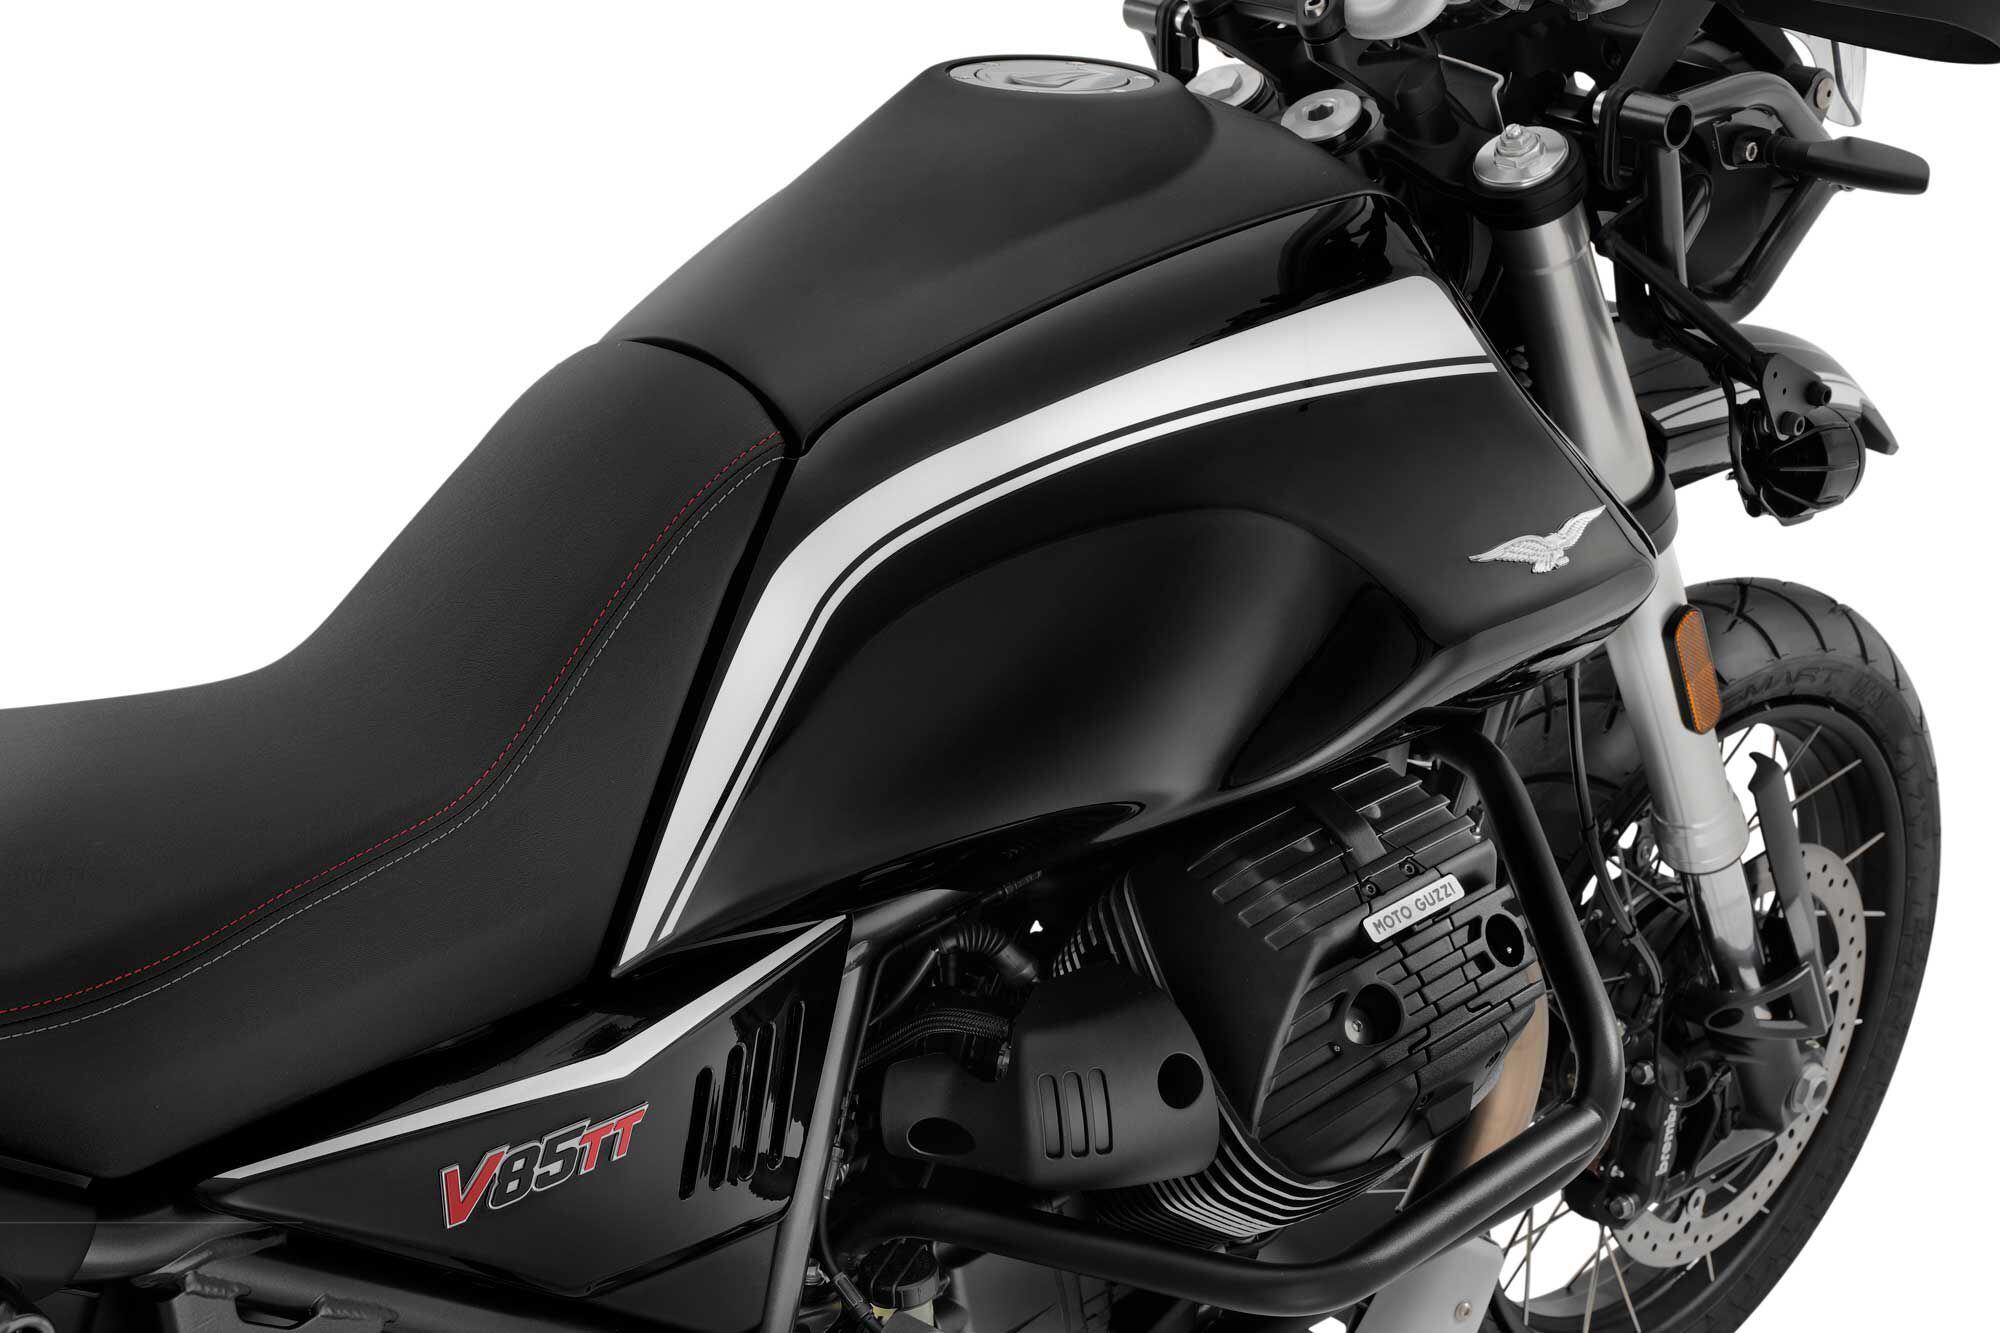 Along with its limited livery, the V85 TT will come with a taller windshield, crashbars, centerstand, and each bike’s unique serial number engraved on its handlebar riser.